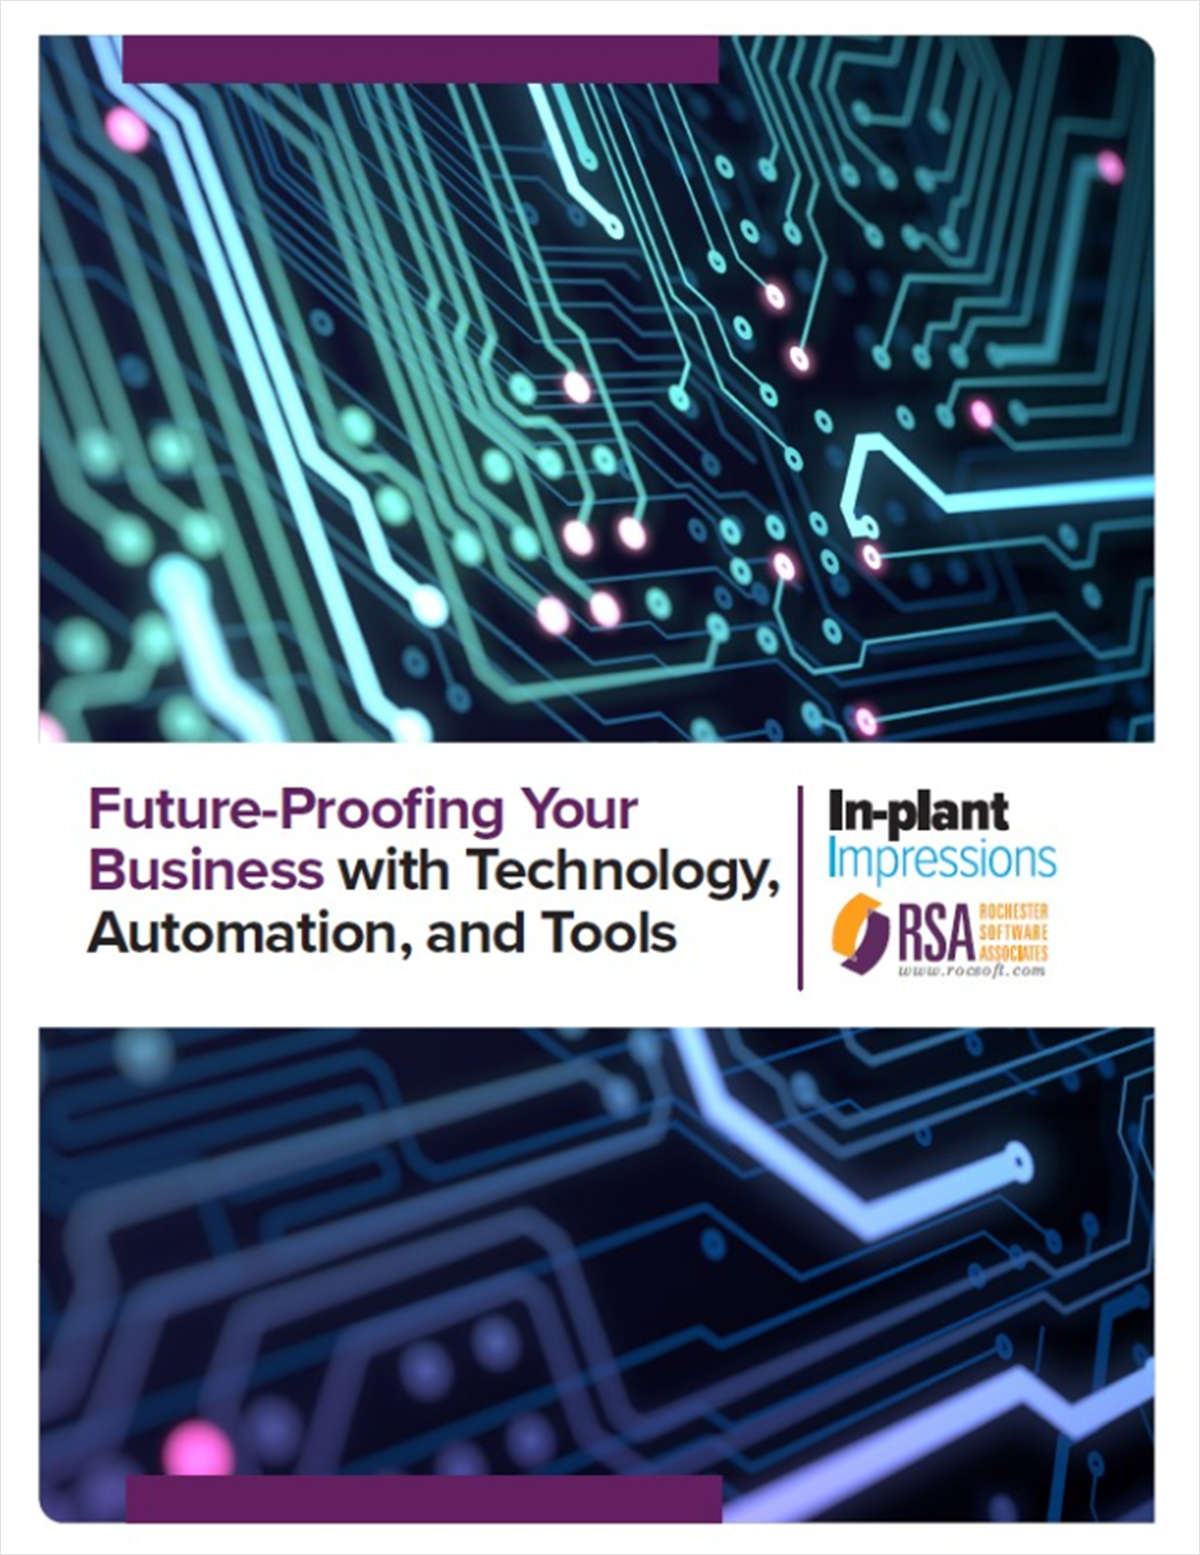 Future-Proofing Your Business with Technology, Automation, and Tools